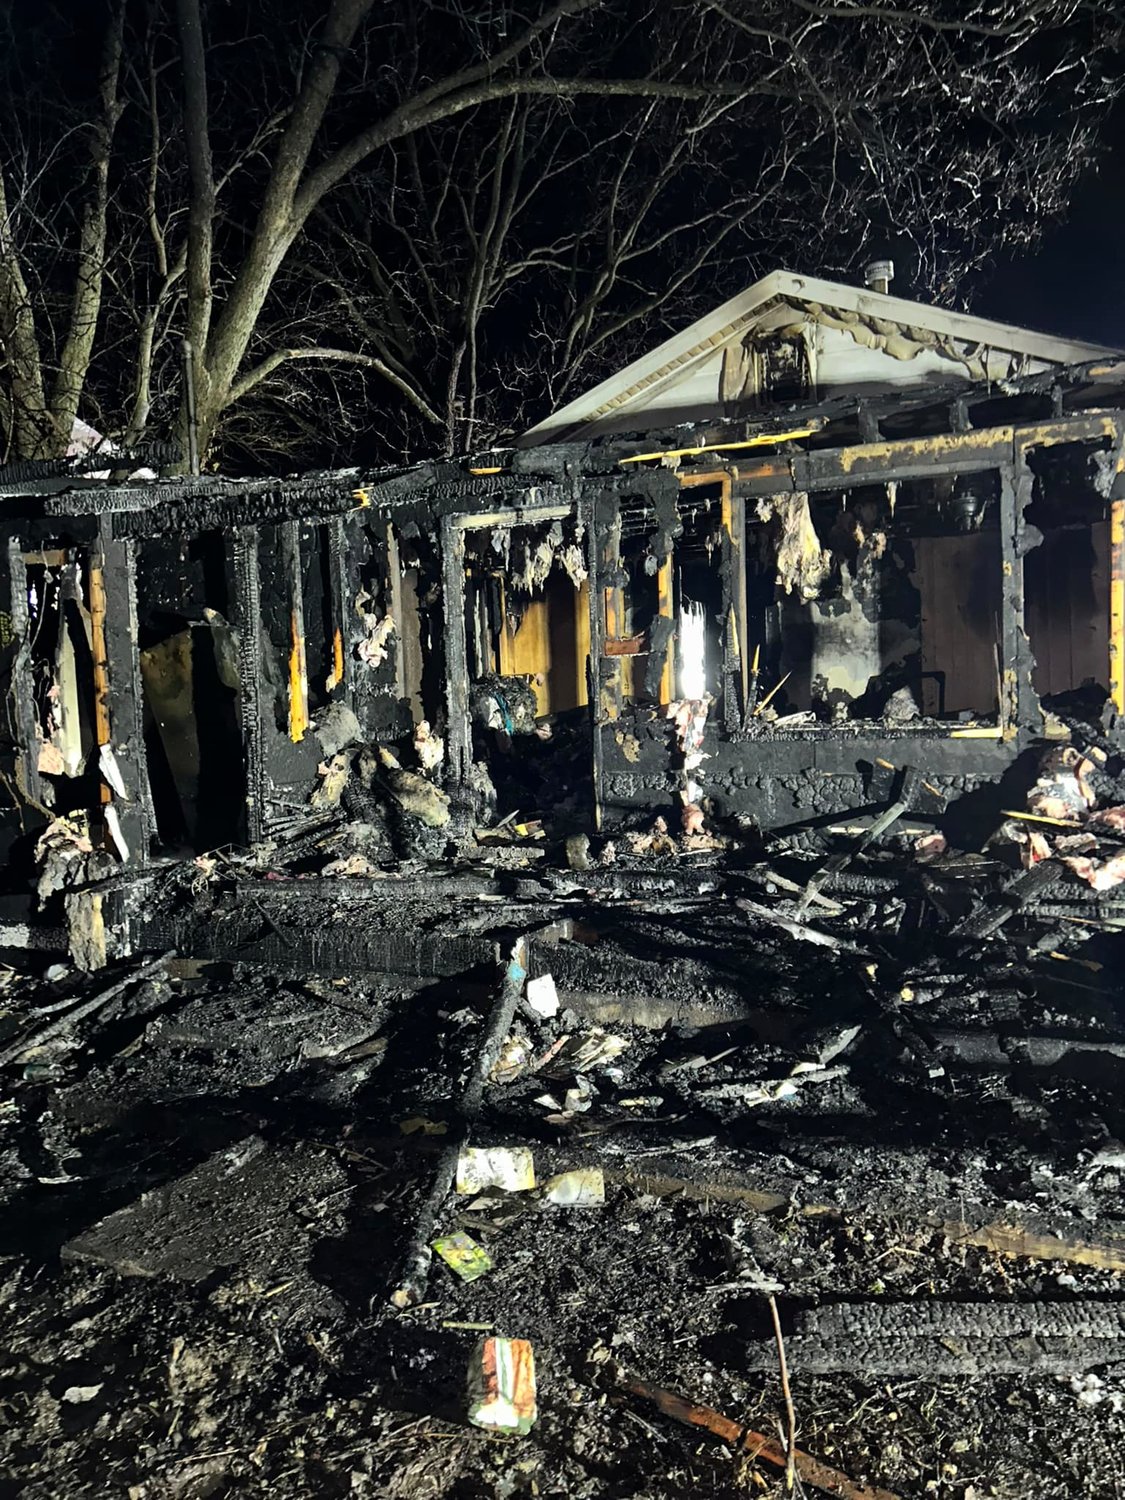 HOUSE FIRE — A fire destroyed the interior of a home in Truesdale Jan. 19. Neighbors worked together to rescue a woman trapped in the house.